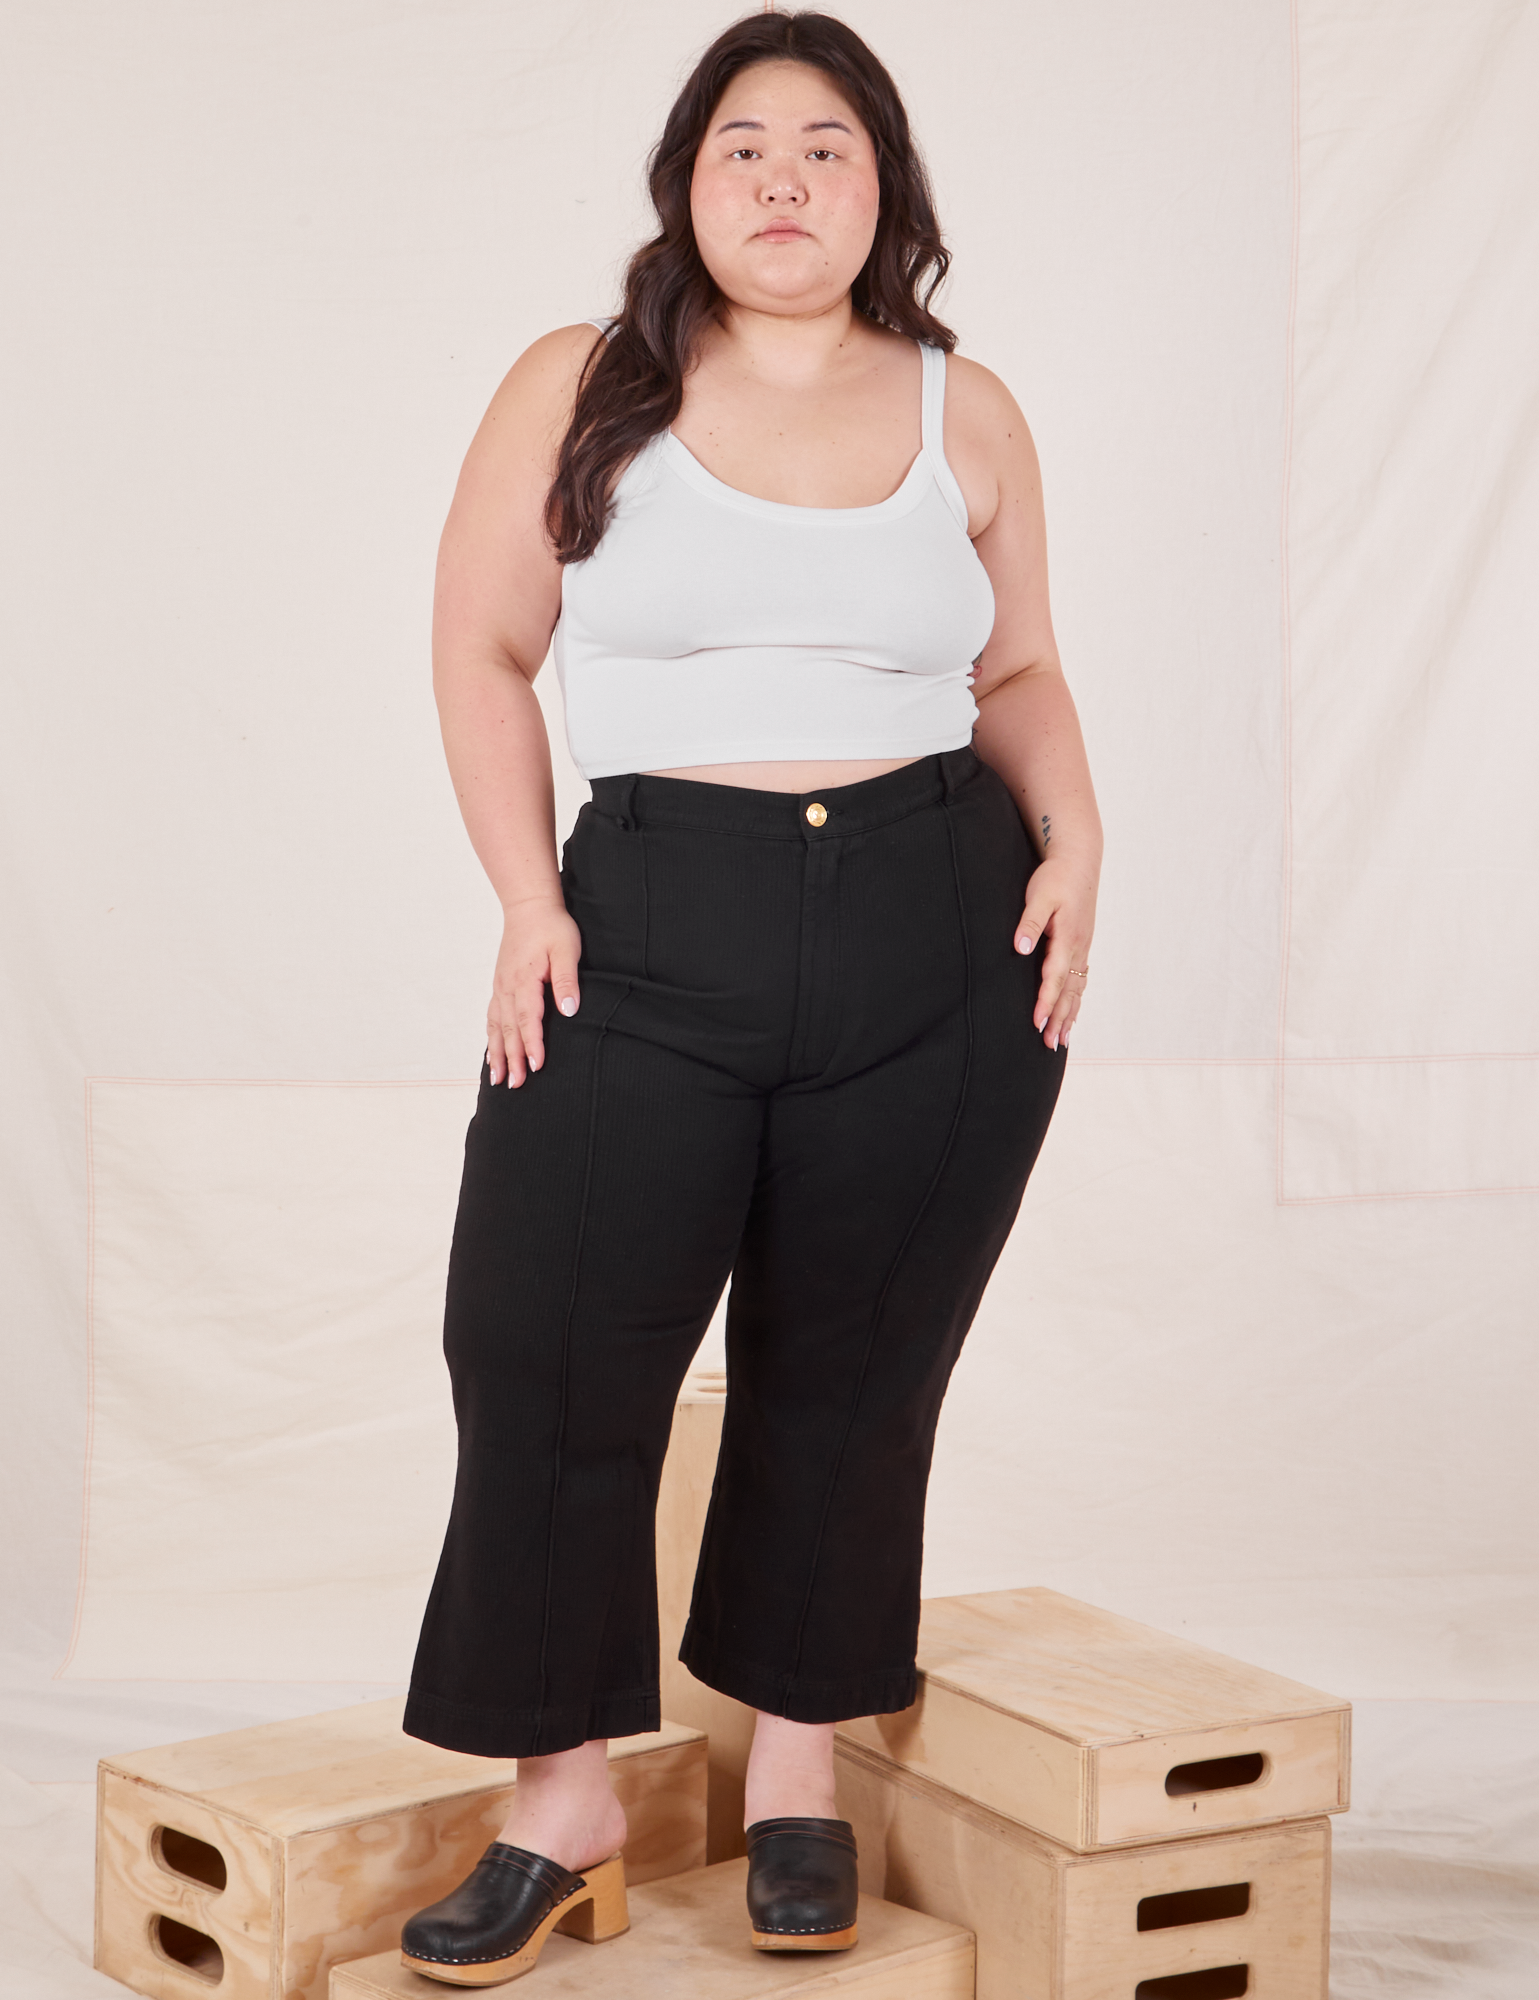 Ashley is 5'7" and wearing 1XL Petite Heritage Westerns in Basic Black paired with Cropped Cami in vintage tee off-white